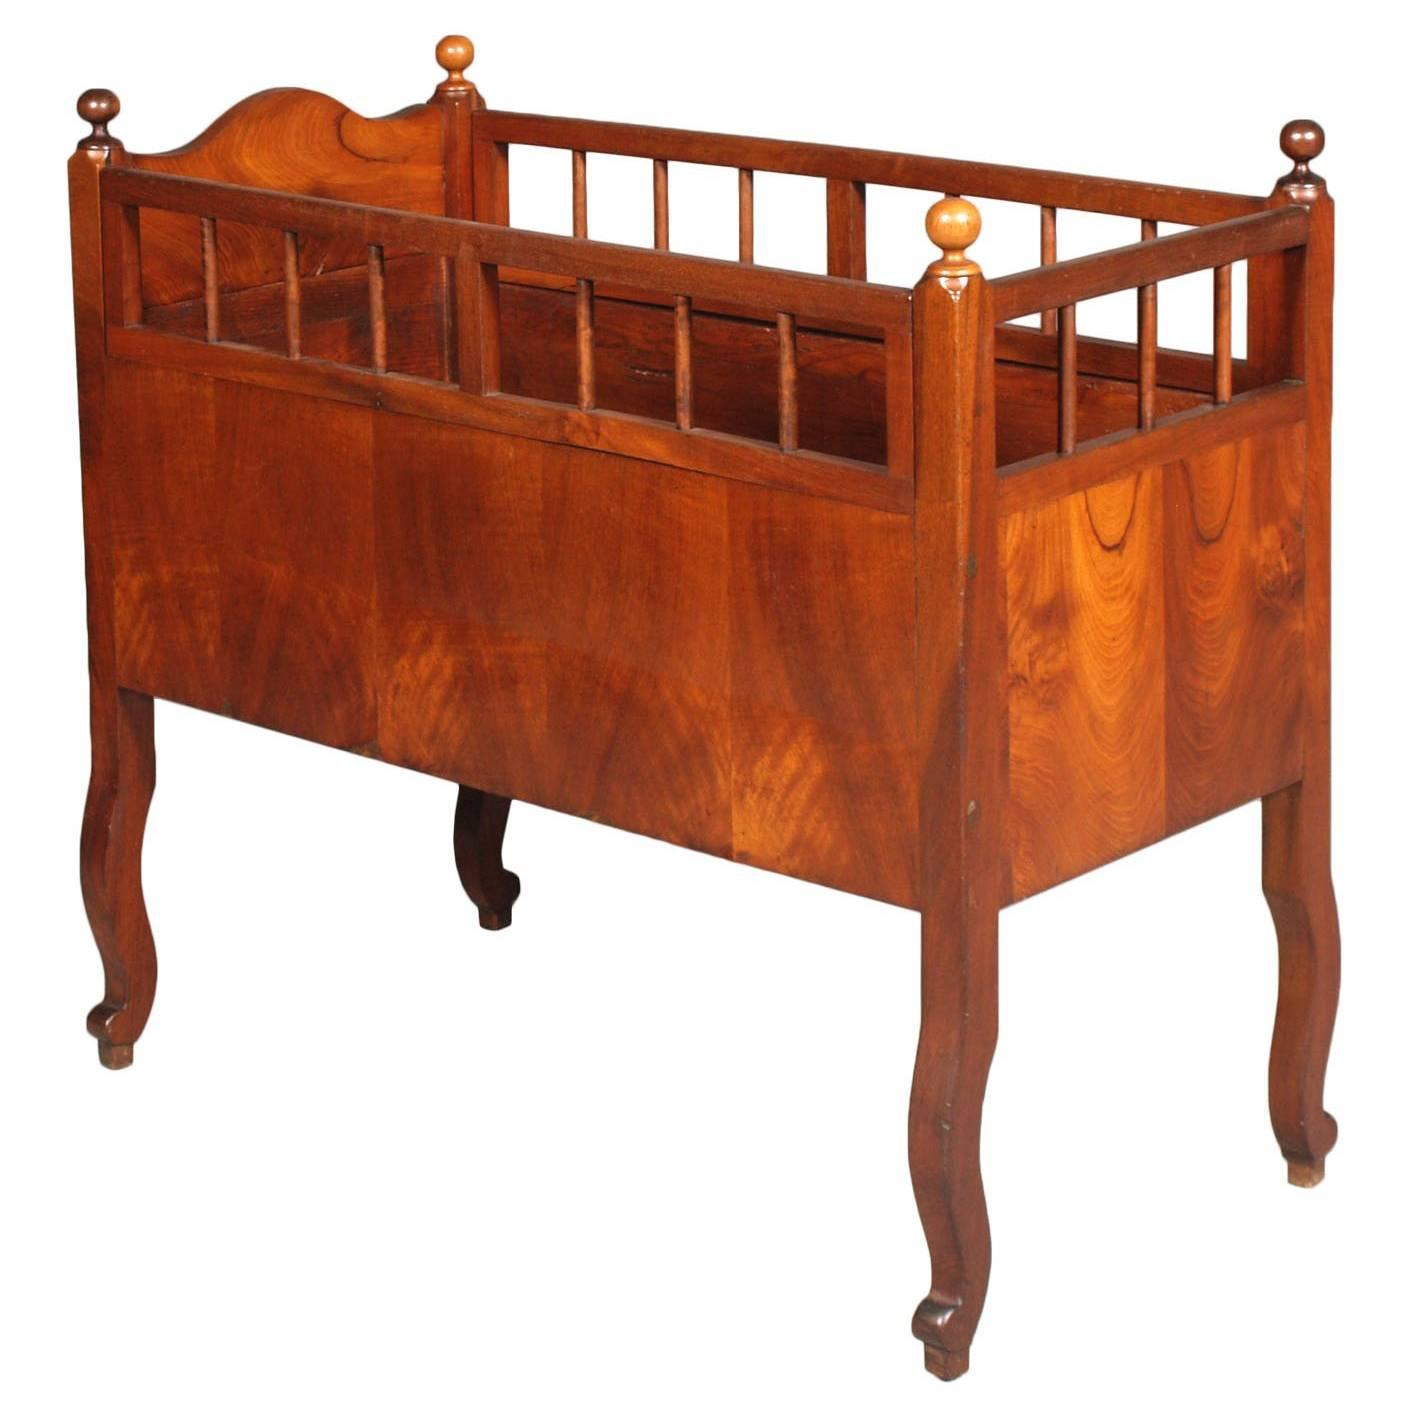 19th Century Cradle Baby Cot in Walnut sanitized and wax polished For Sale